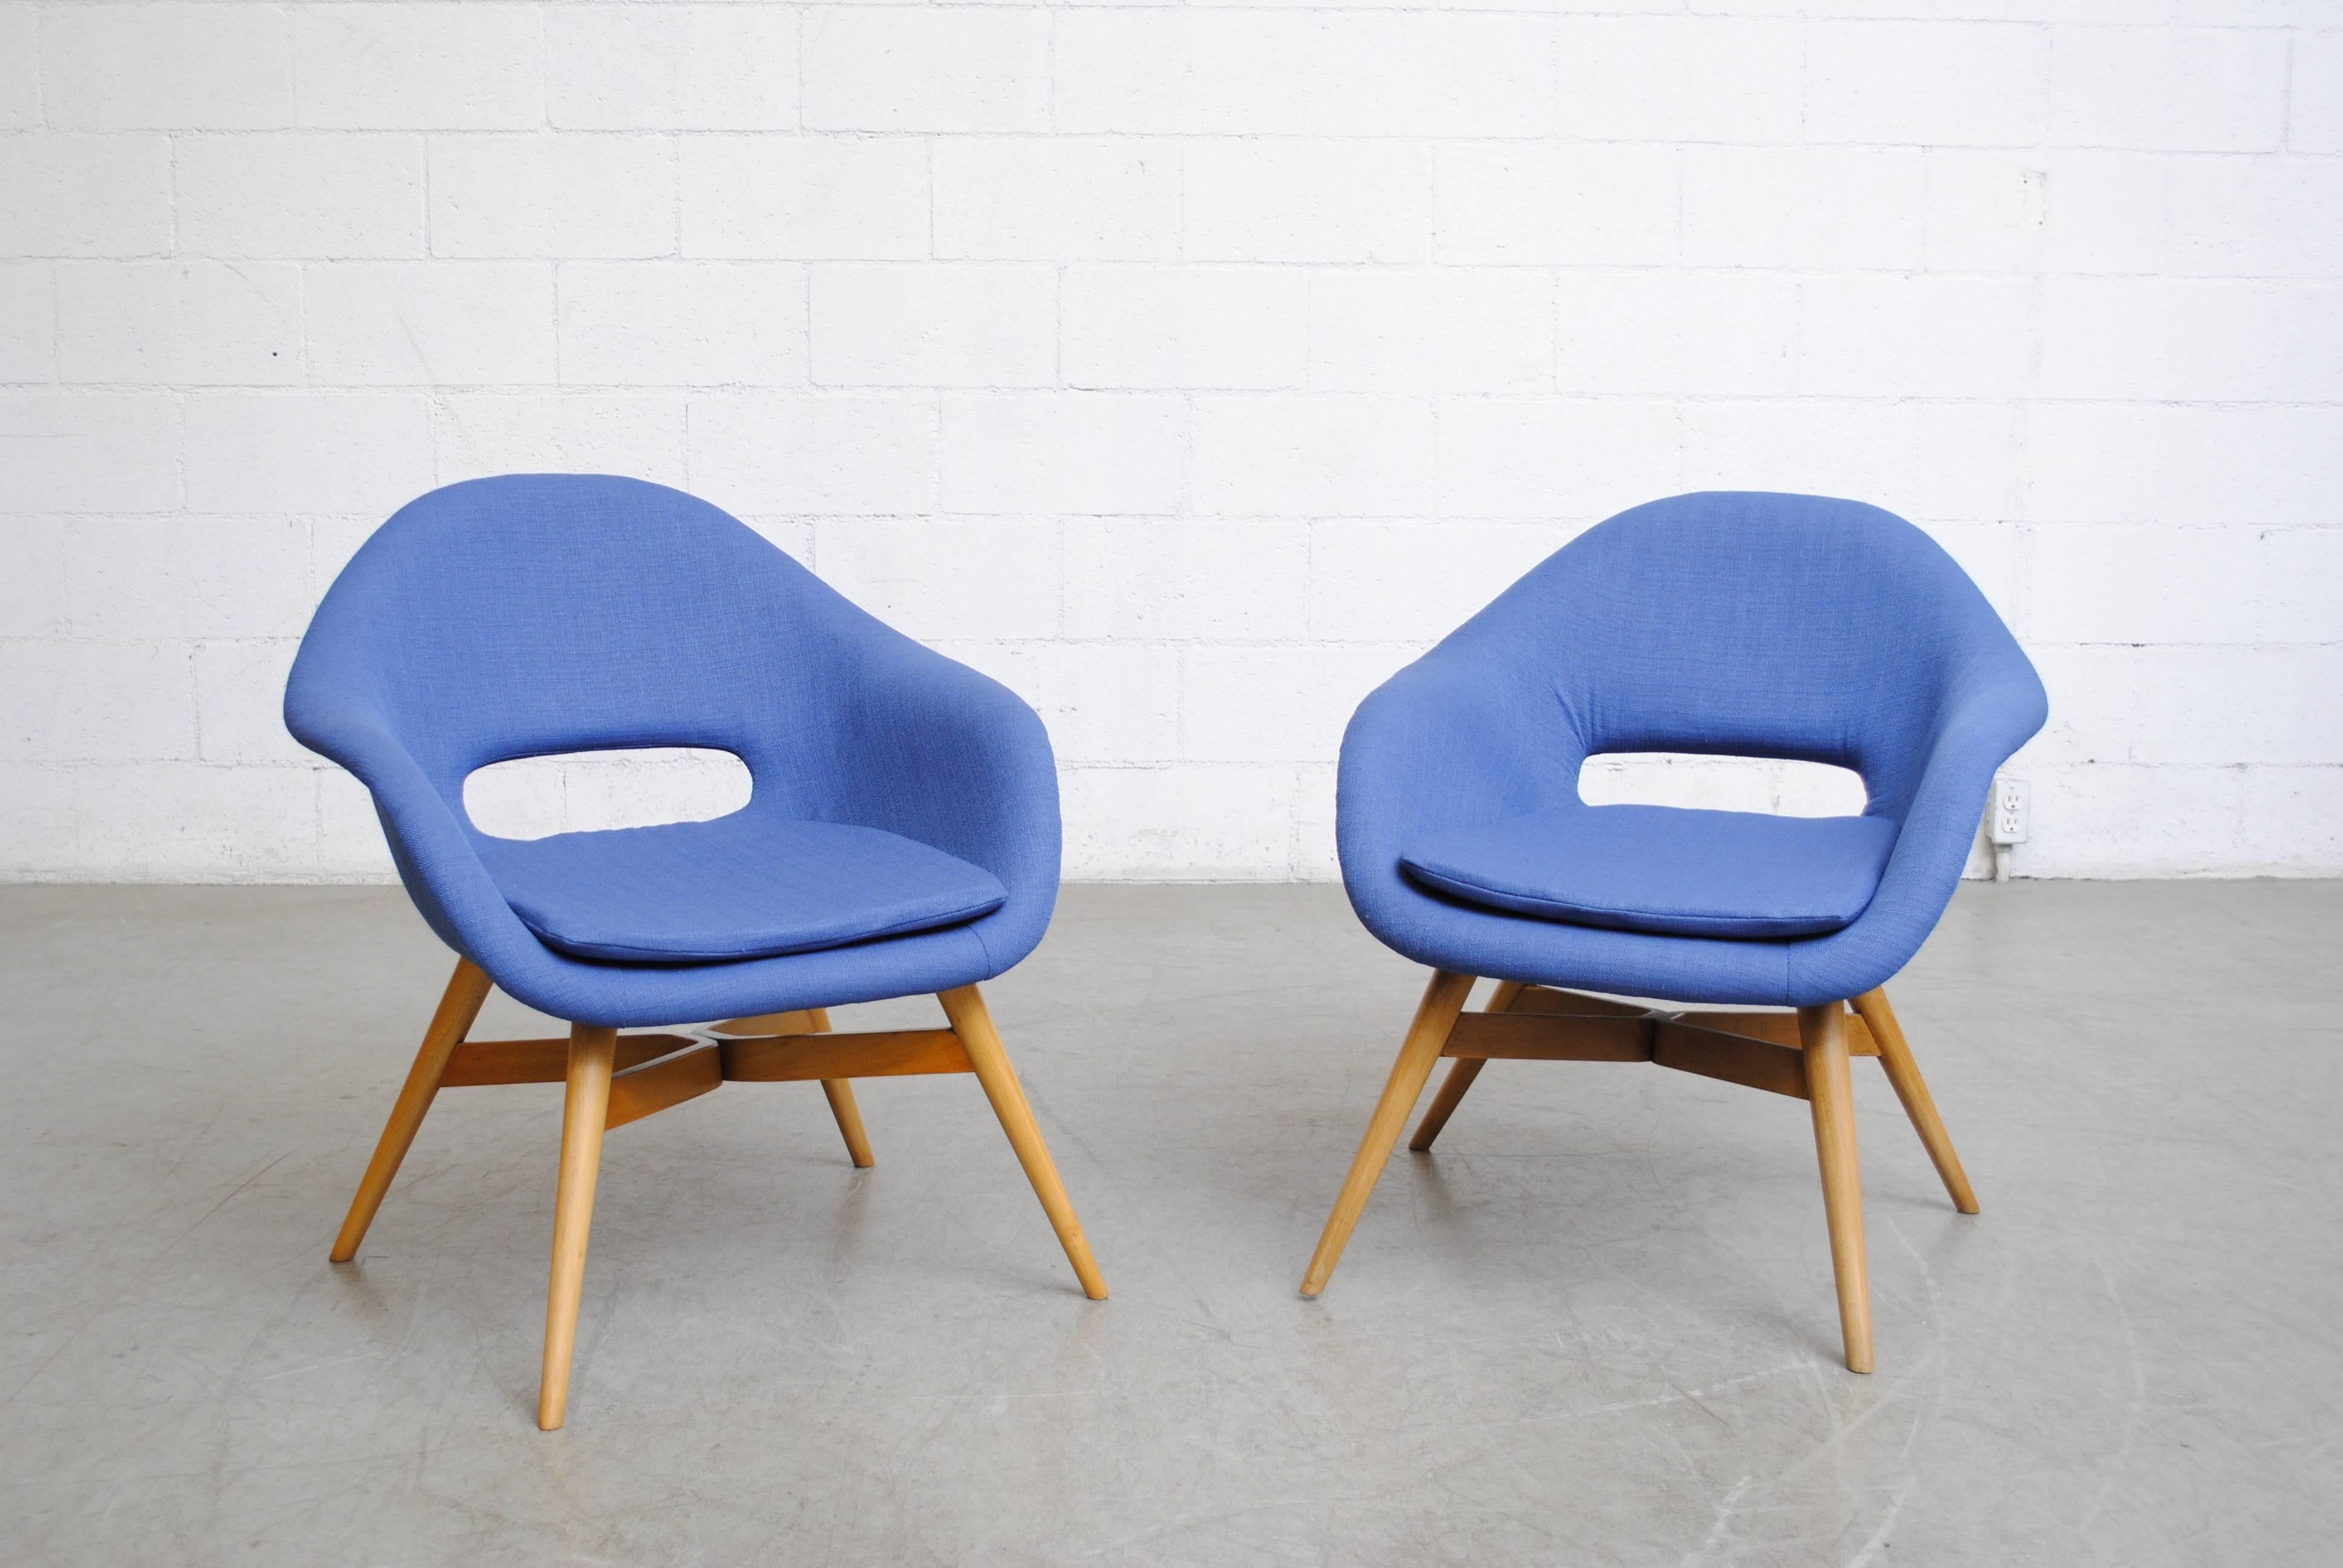 Newly upholstered modern bucket chair with Saarinen style cut-outs by Miroslav Navratil in royal blue upholstery with original birch frame in good original condition. Photo shows the blue as slightly more vibrant than in reality.